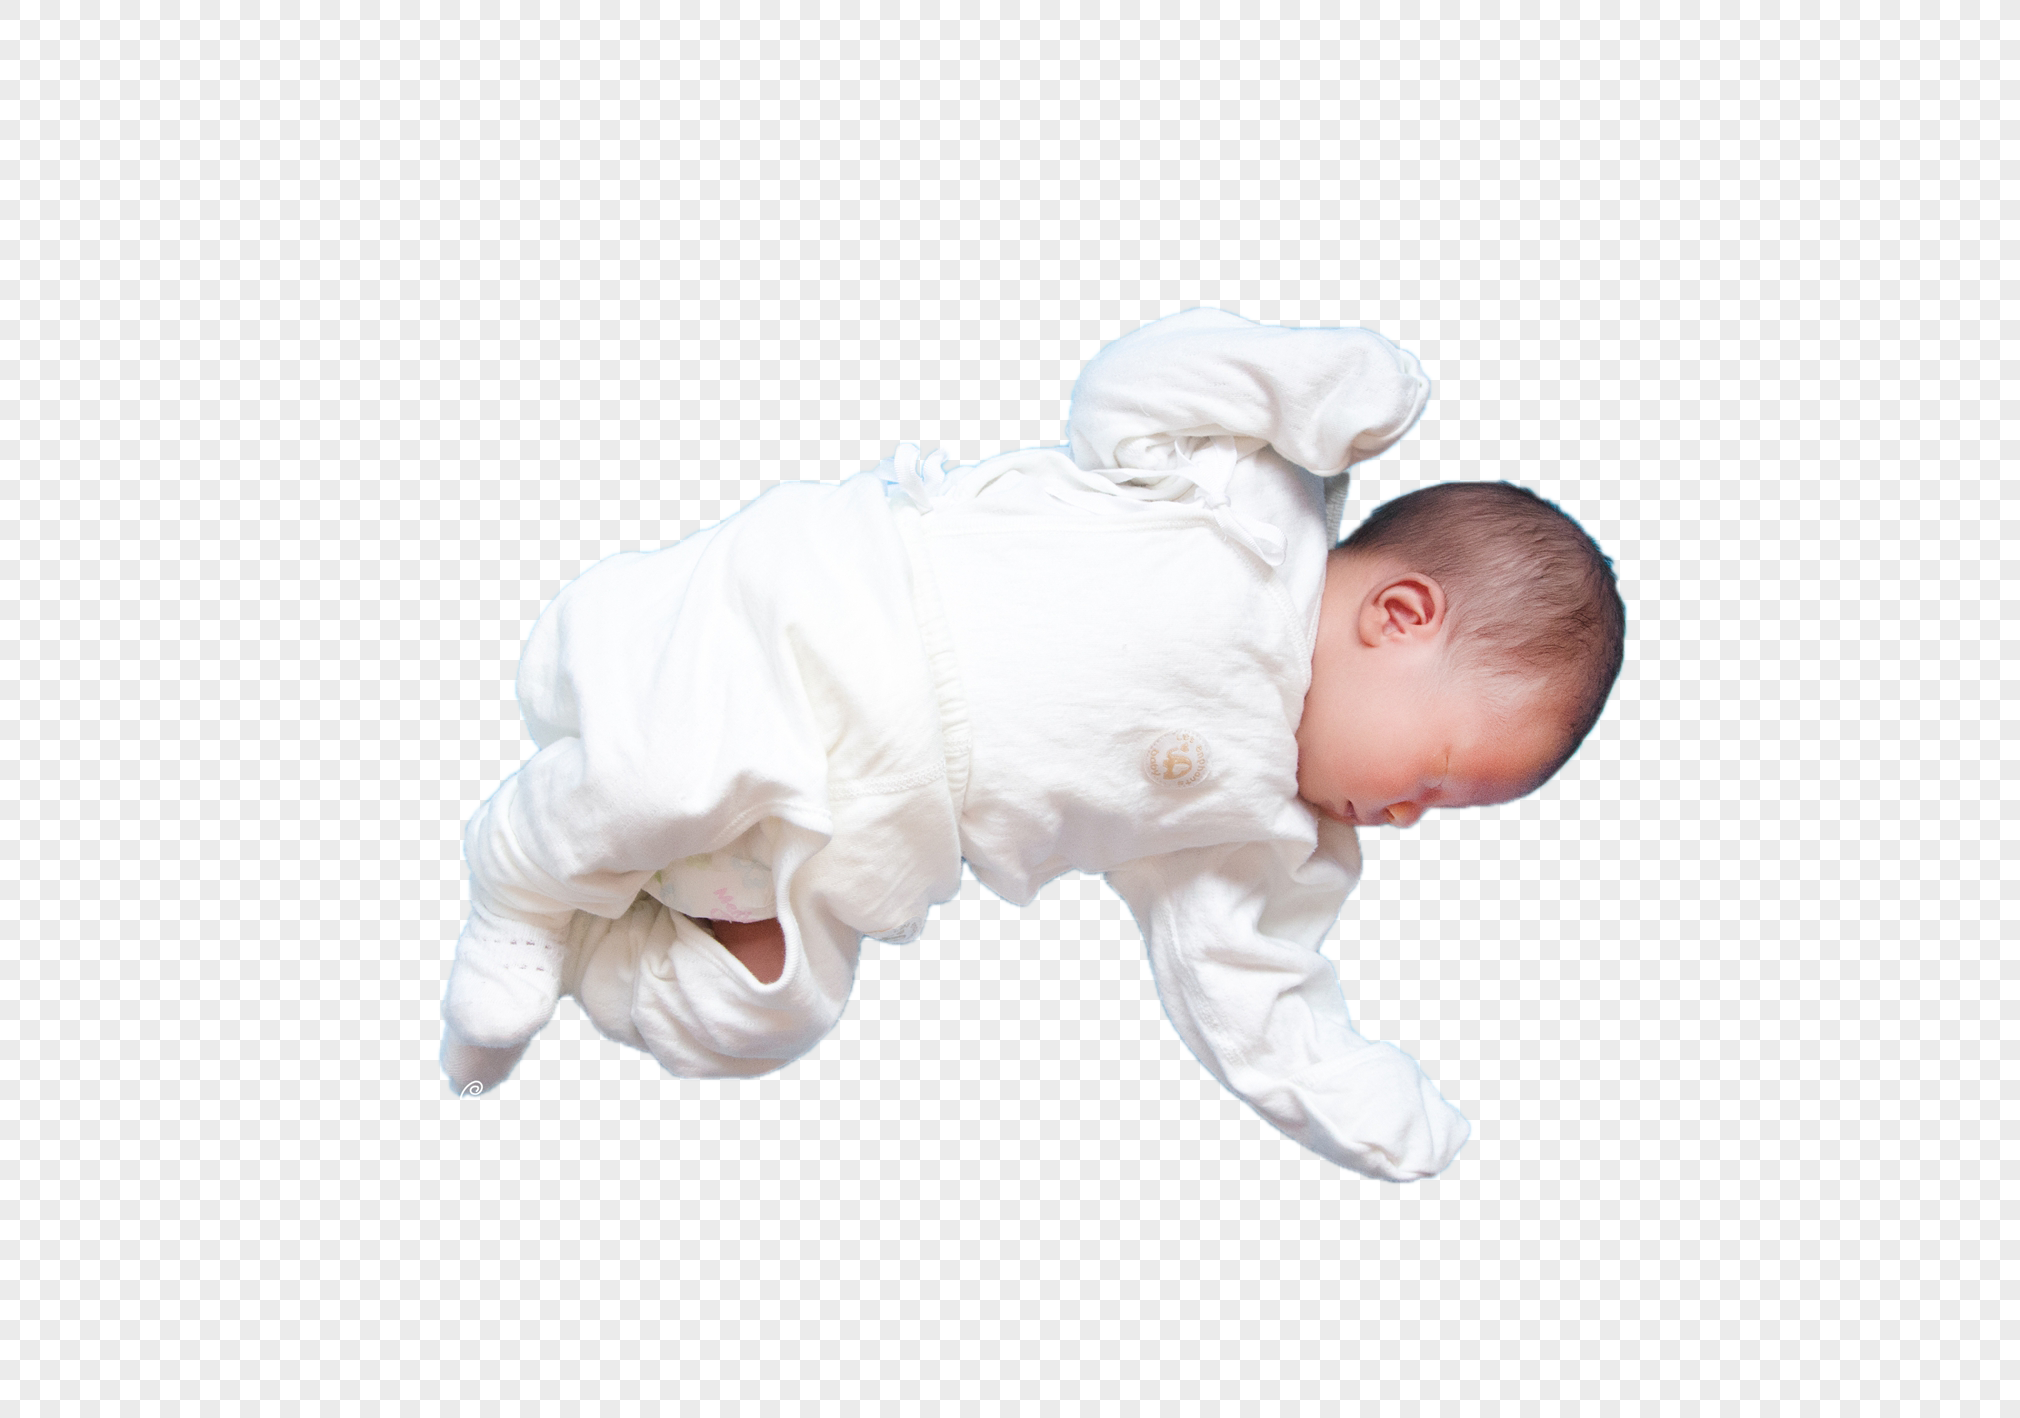 Sleeping baby, material, child, sleep png white transparent